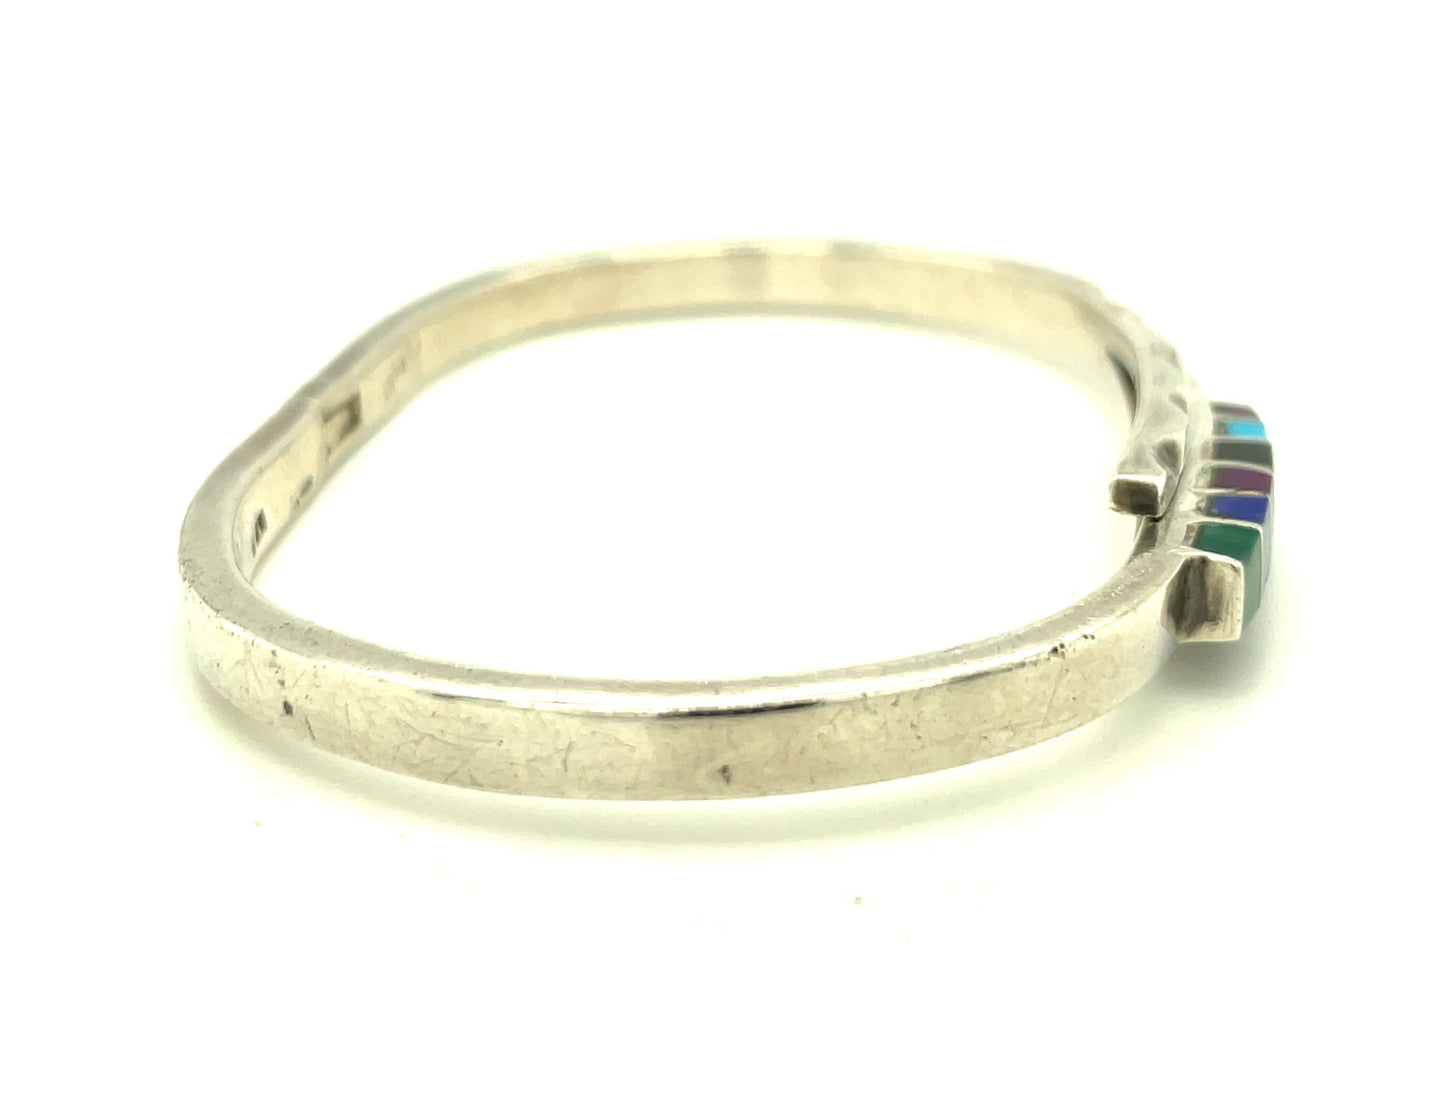 Vintage Sterling Silver and Inlay Bracelet